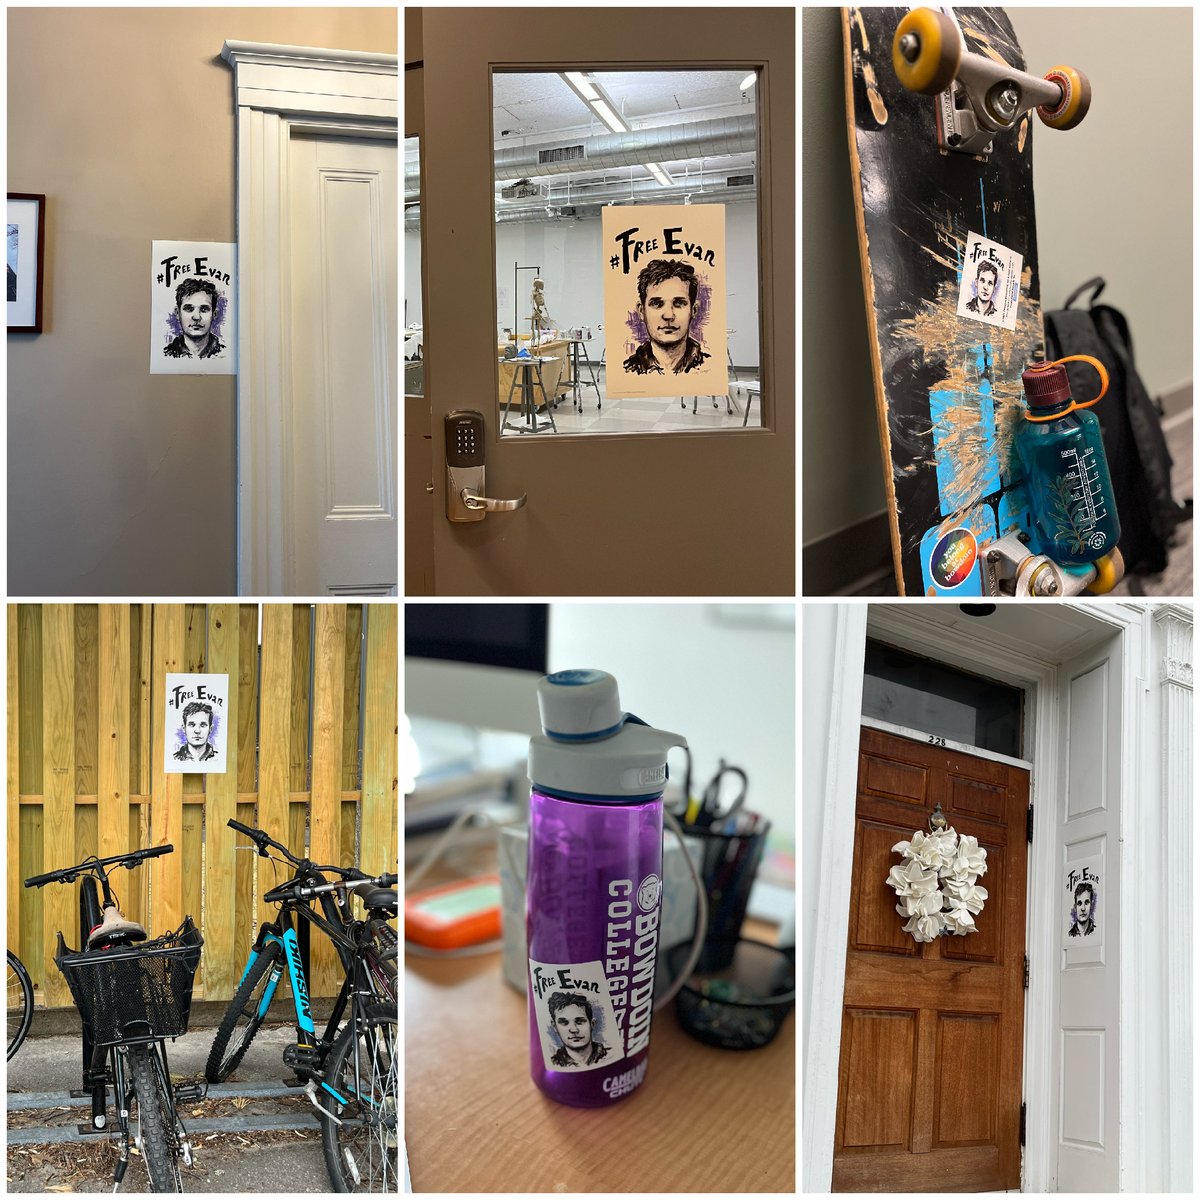 Our colleague and friend, Evan Gershkovich, is everywhere at his alma mater. Original art by @mollycrabapple, photos by @BowdoinCollege @WSJ #IStandwithEvan